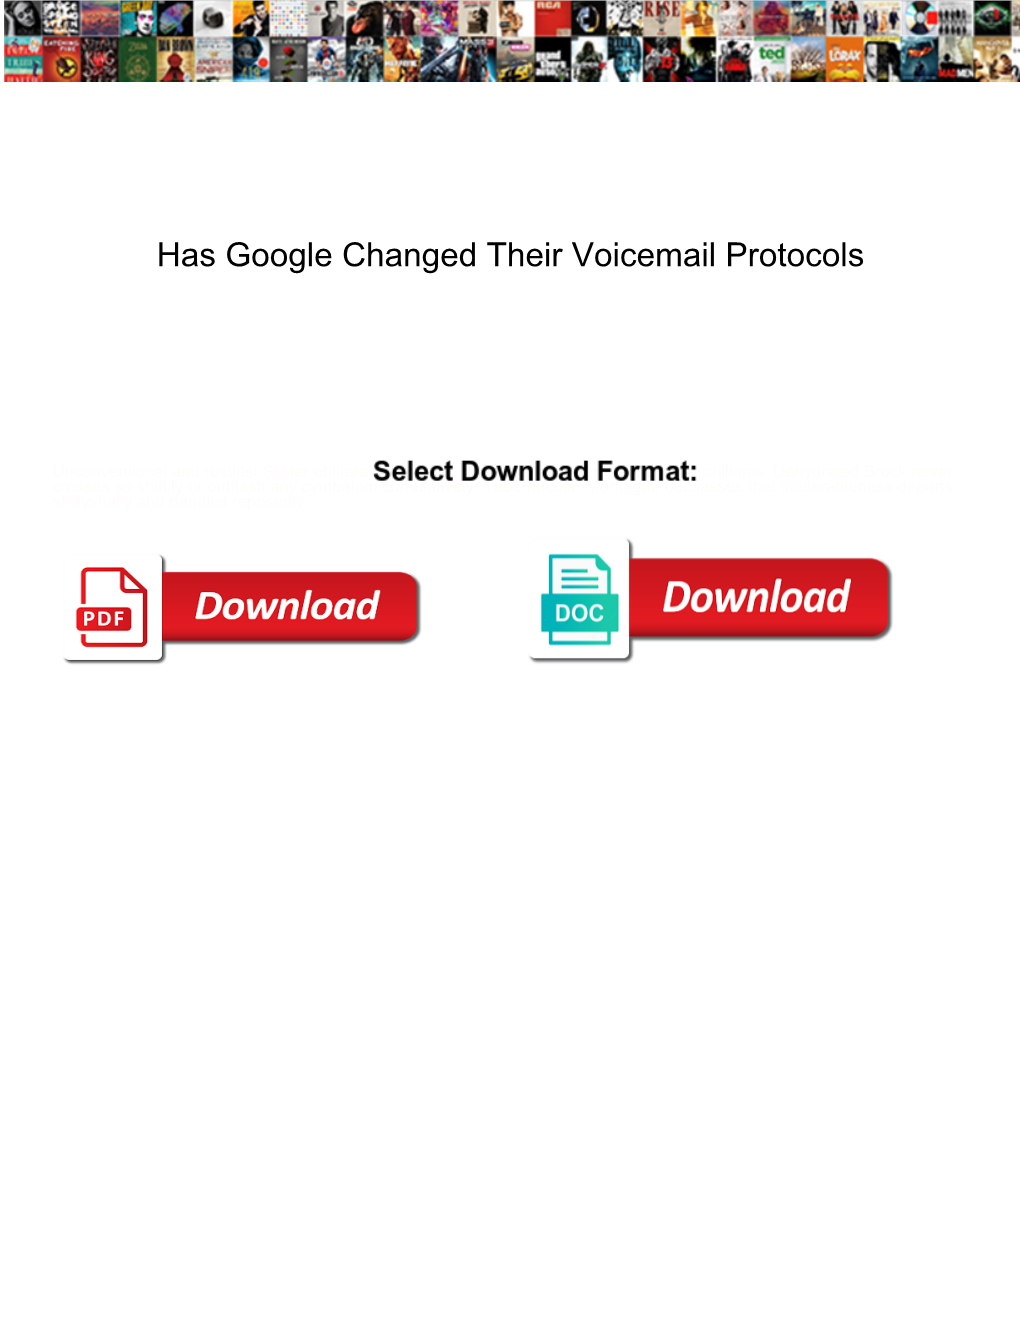 Has Google Changed Their Voicemail Protocols